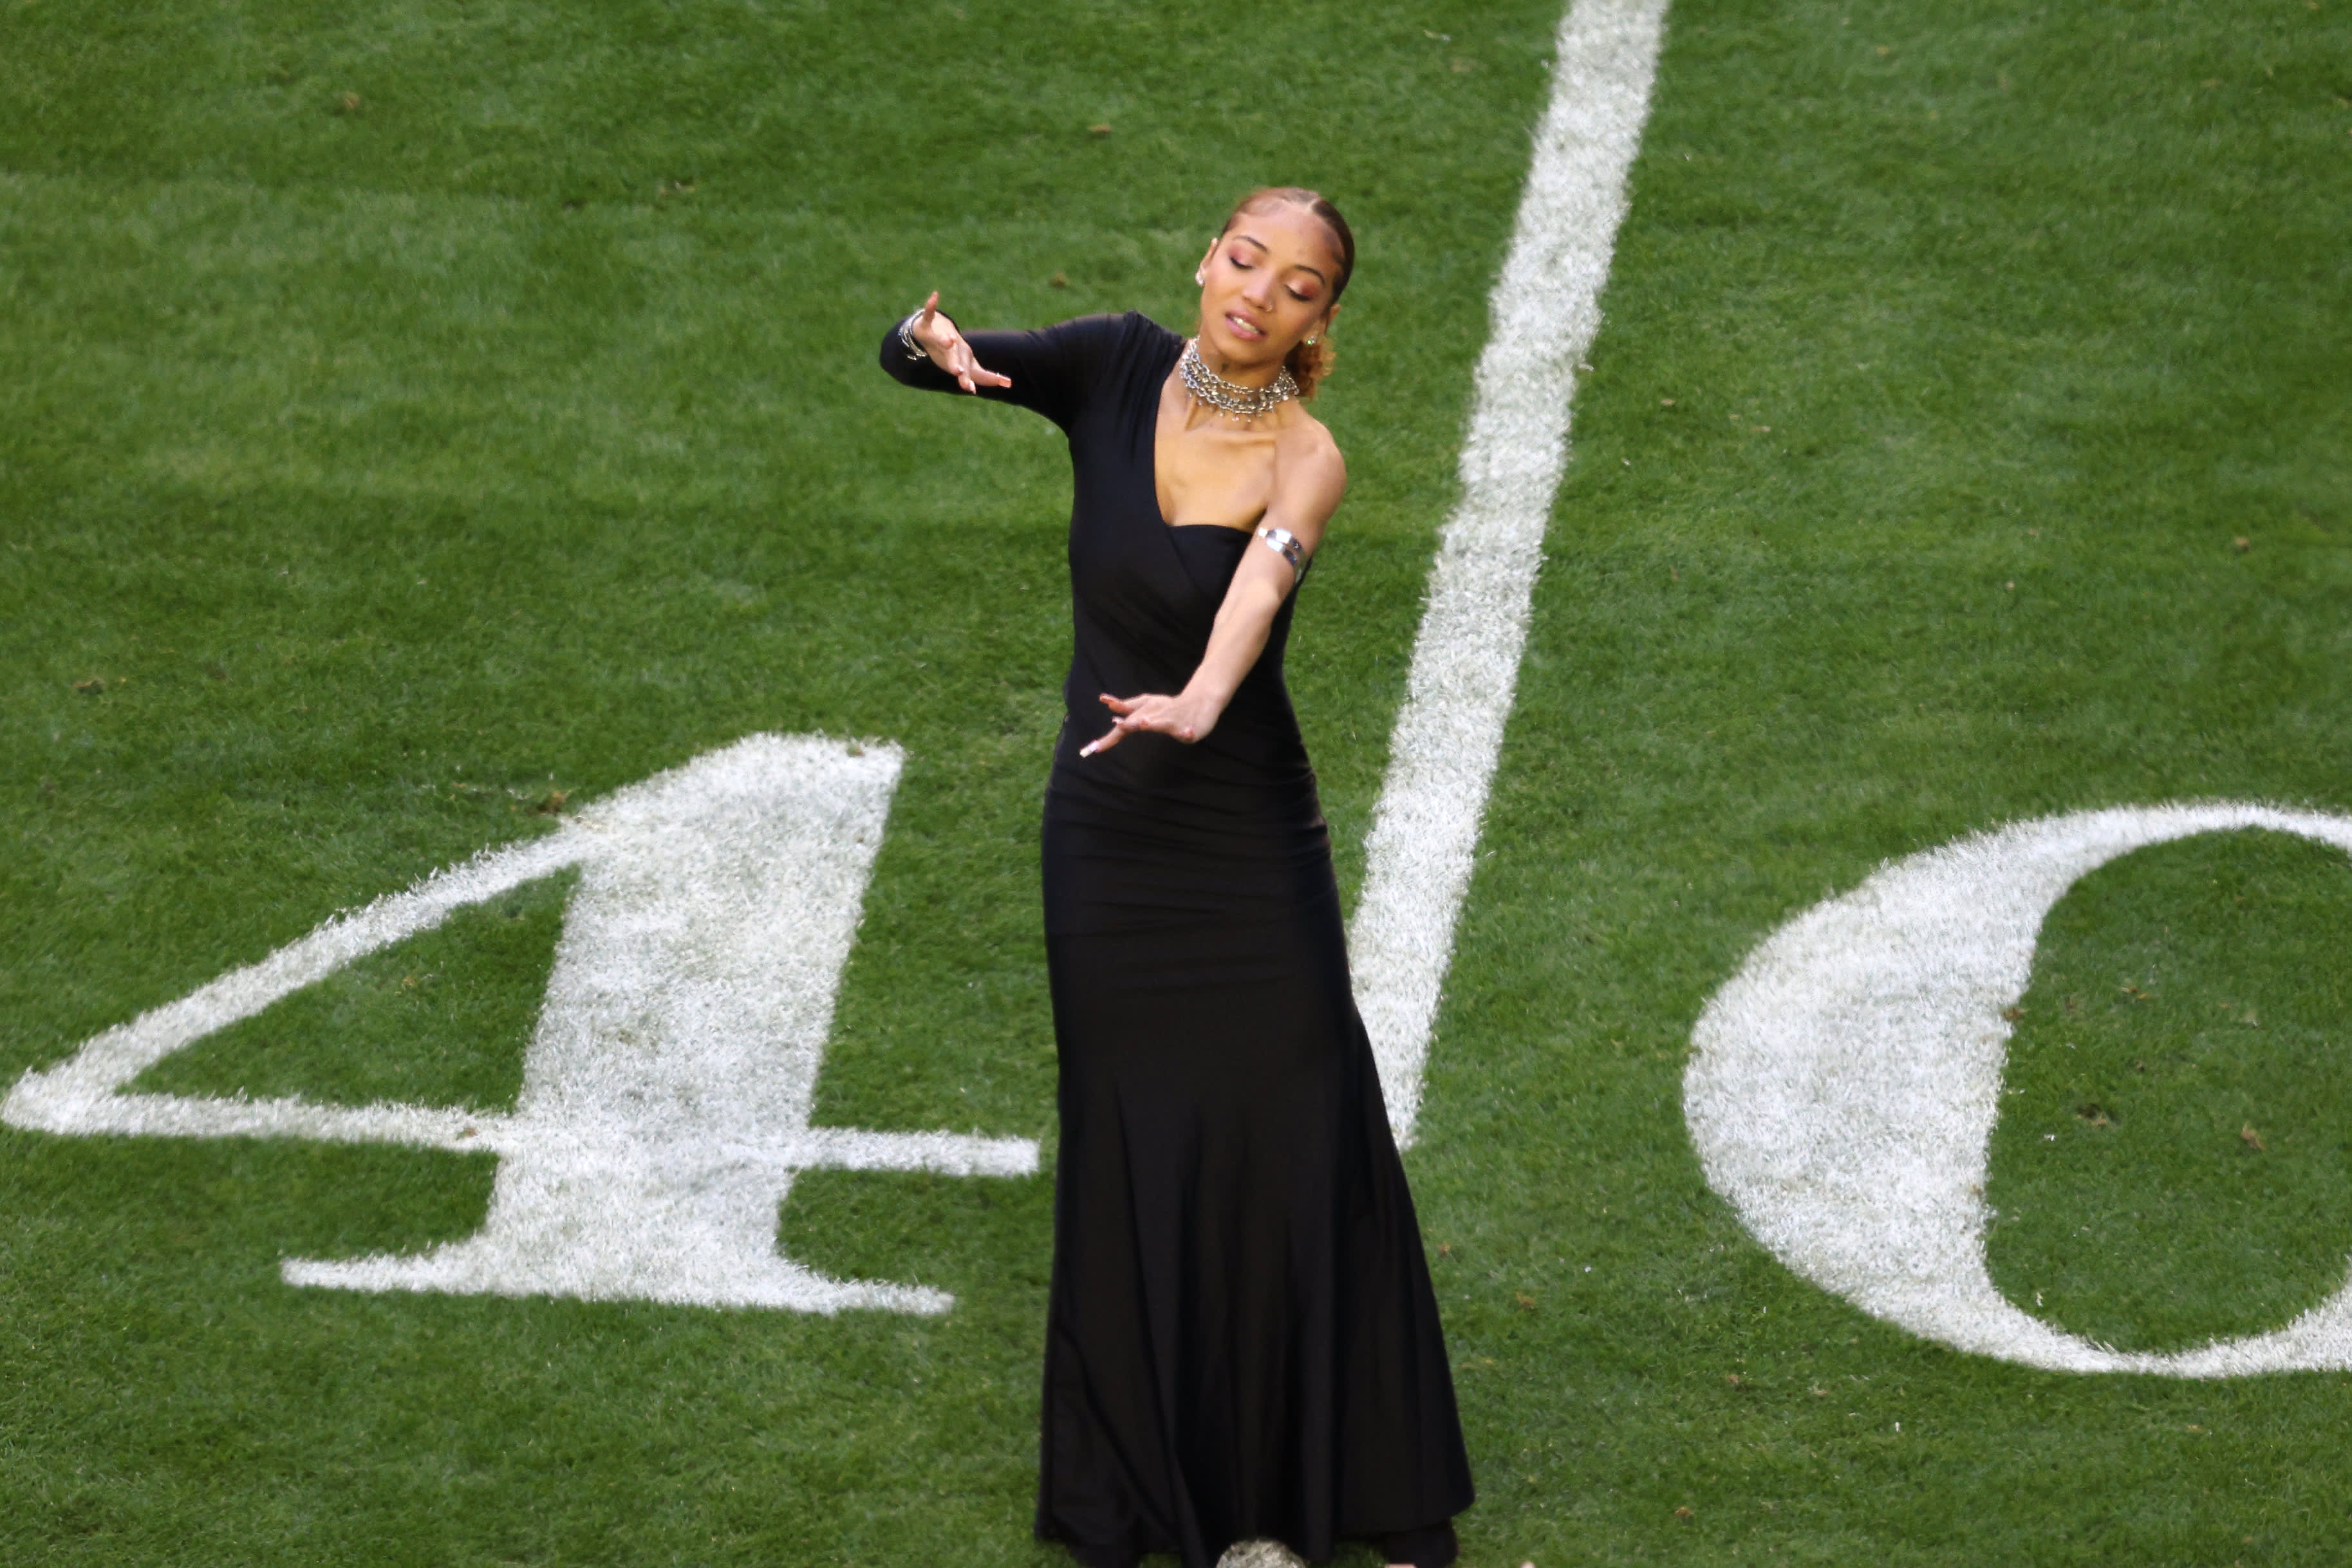 Meet the artist who will lead the Super Bowl 2021 half-time